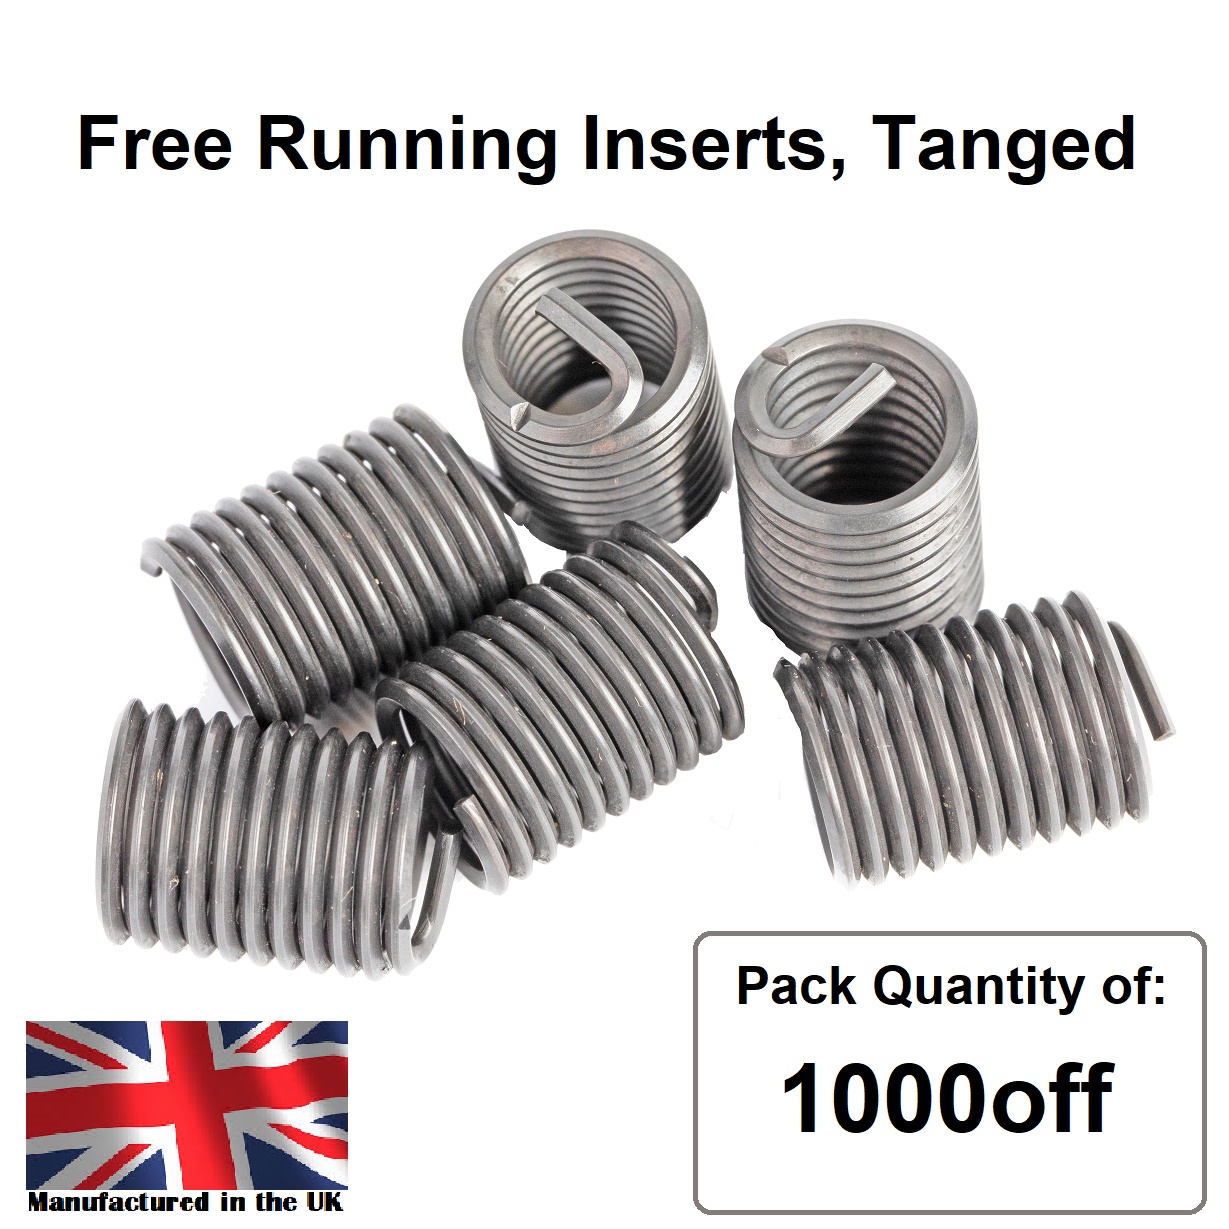 5/8 x 18 x 2.5D UNF, Free Running, Tanged, Wire Thread Repair Insert, 304/A2 Stainless (Pack 1000)